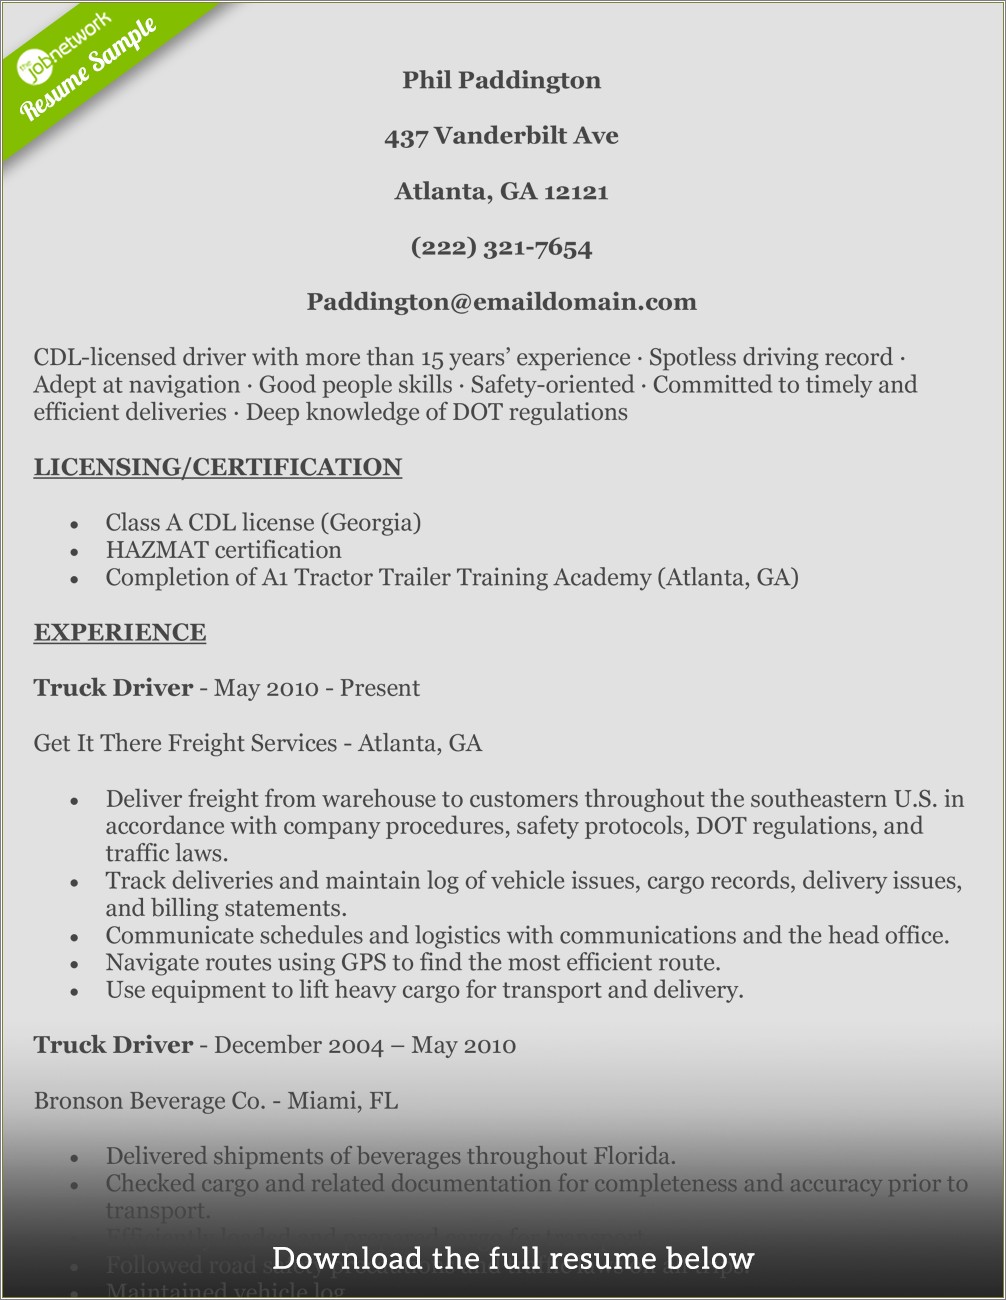 Example Resumes For The Trucking Industry